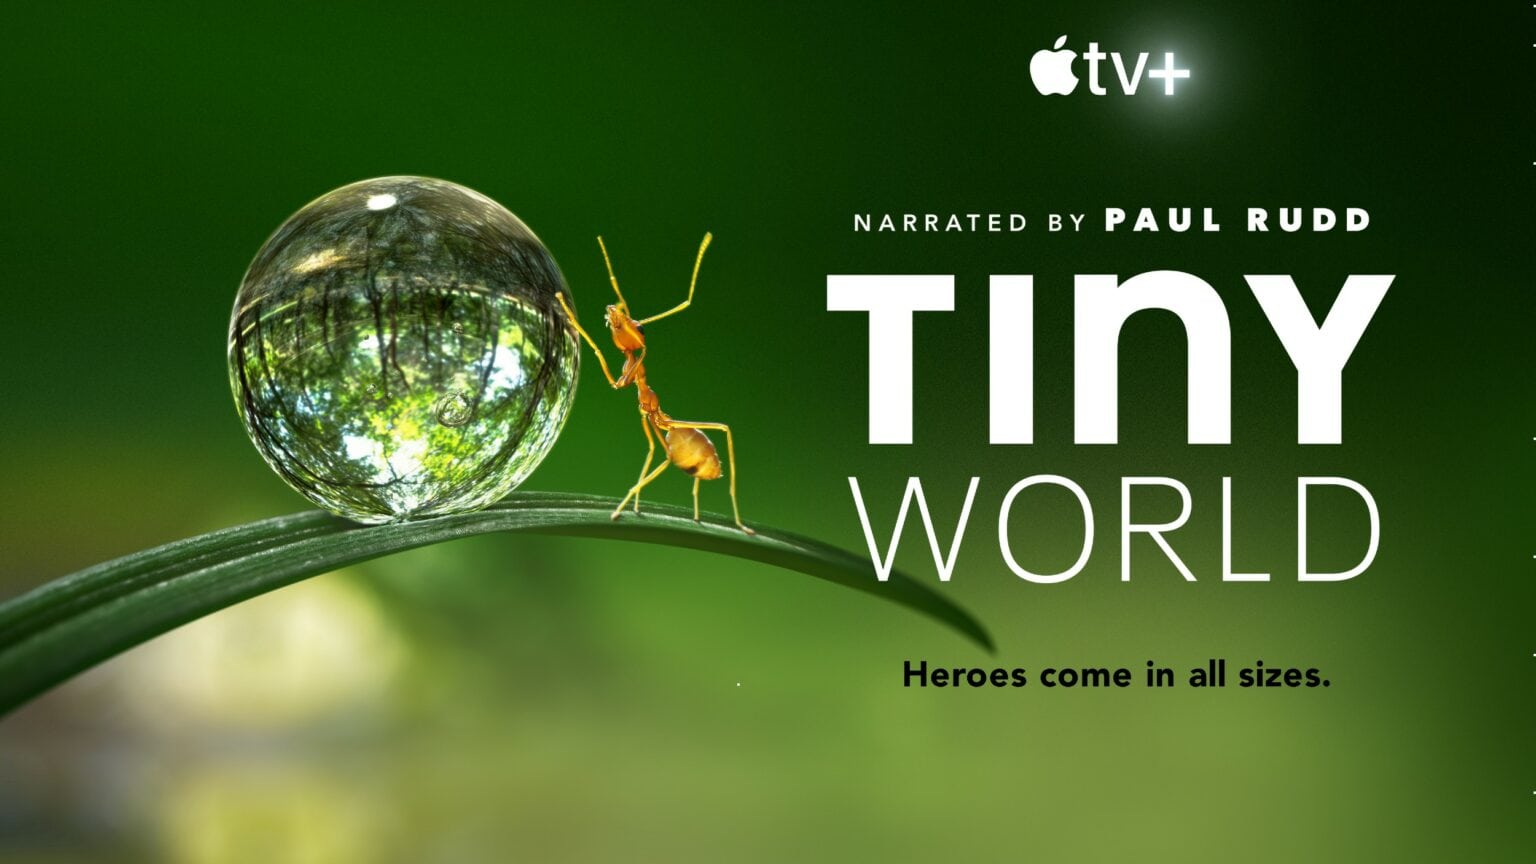 Ant-Man is the perfect narrator for Tiny World, an upcoming Apple TV+ nature documentary.